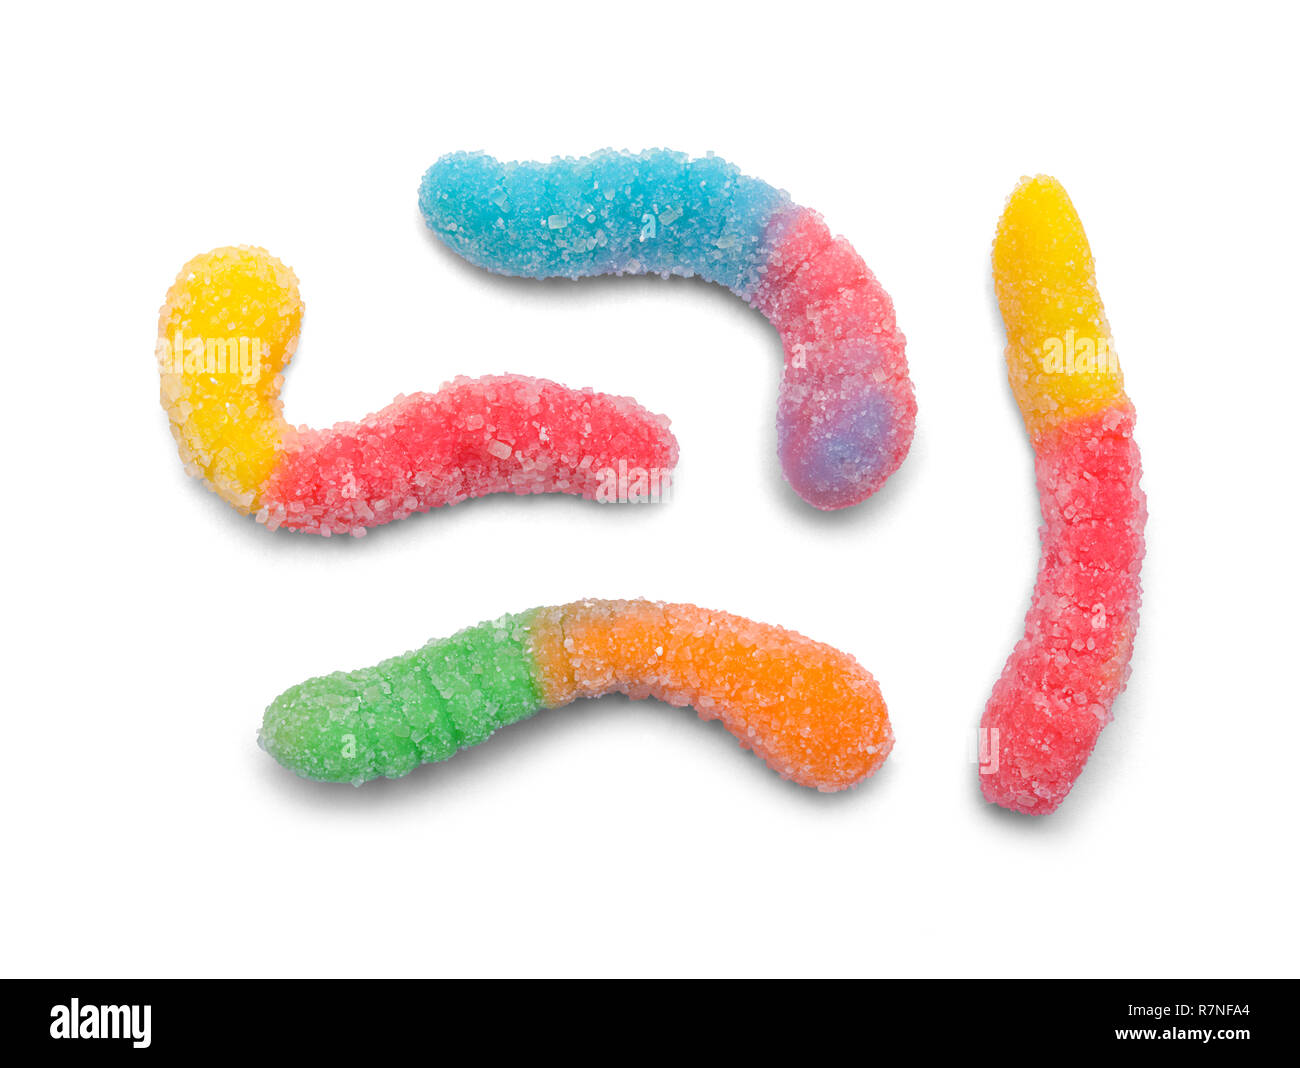 Few Gummy Worms Isolated on a White Background. Stock Photo